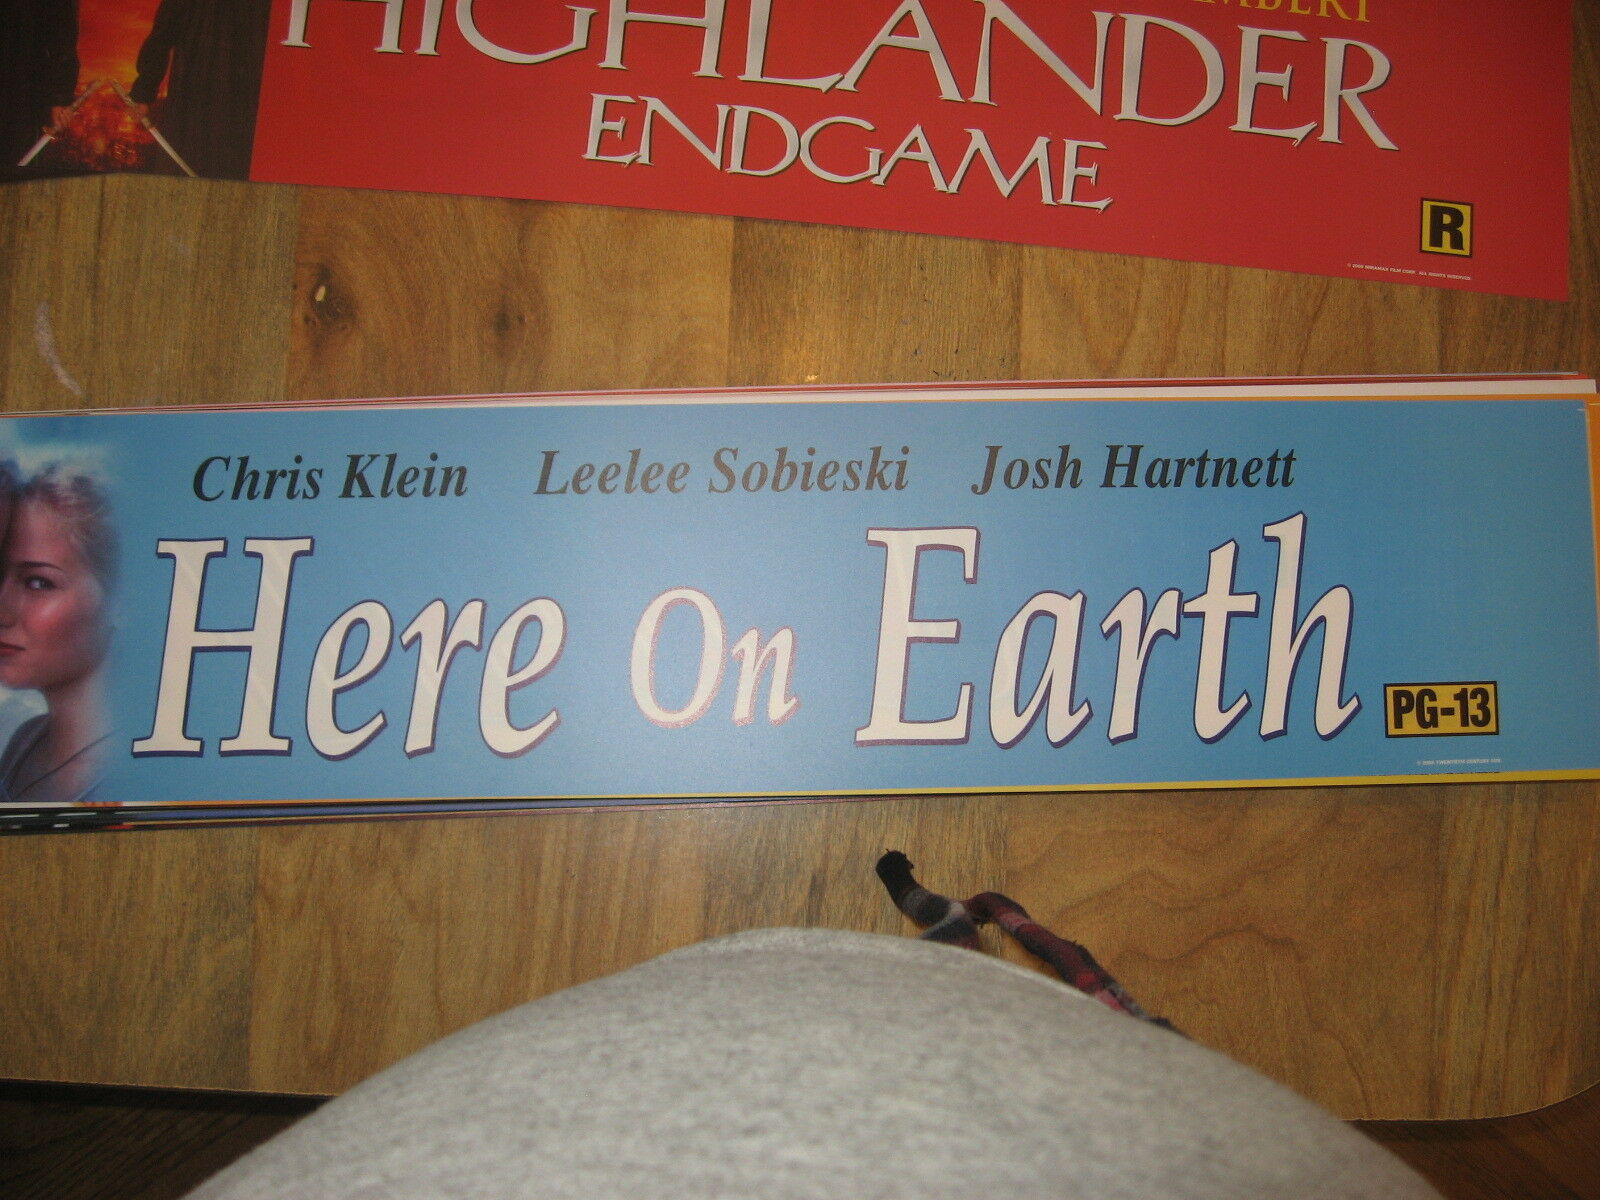 Theater Marquee Mylar Hereon Earth